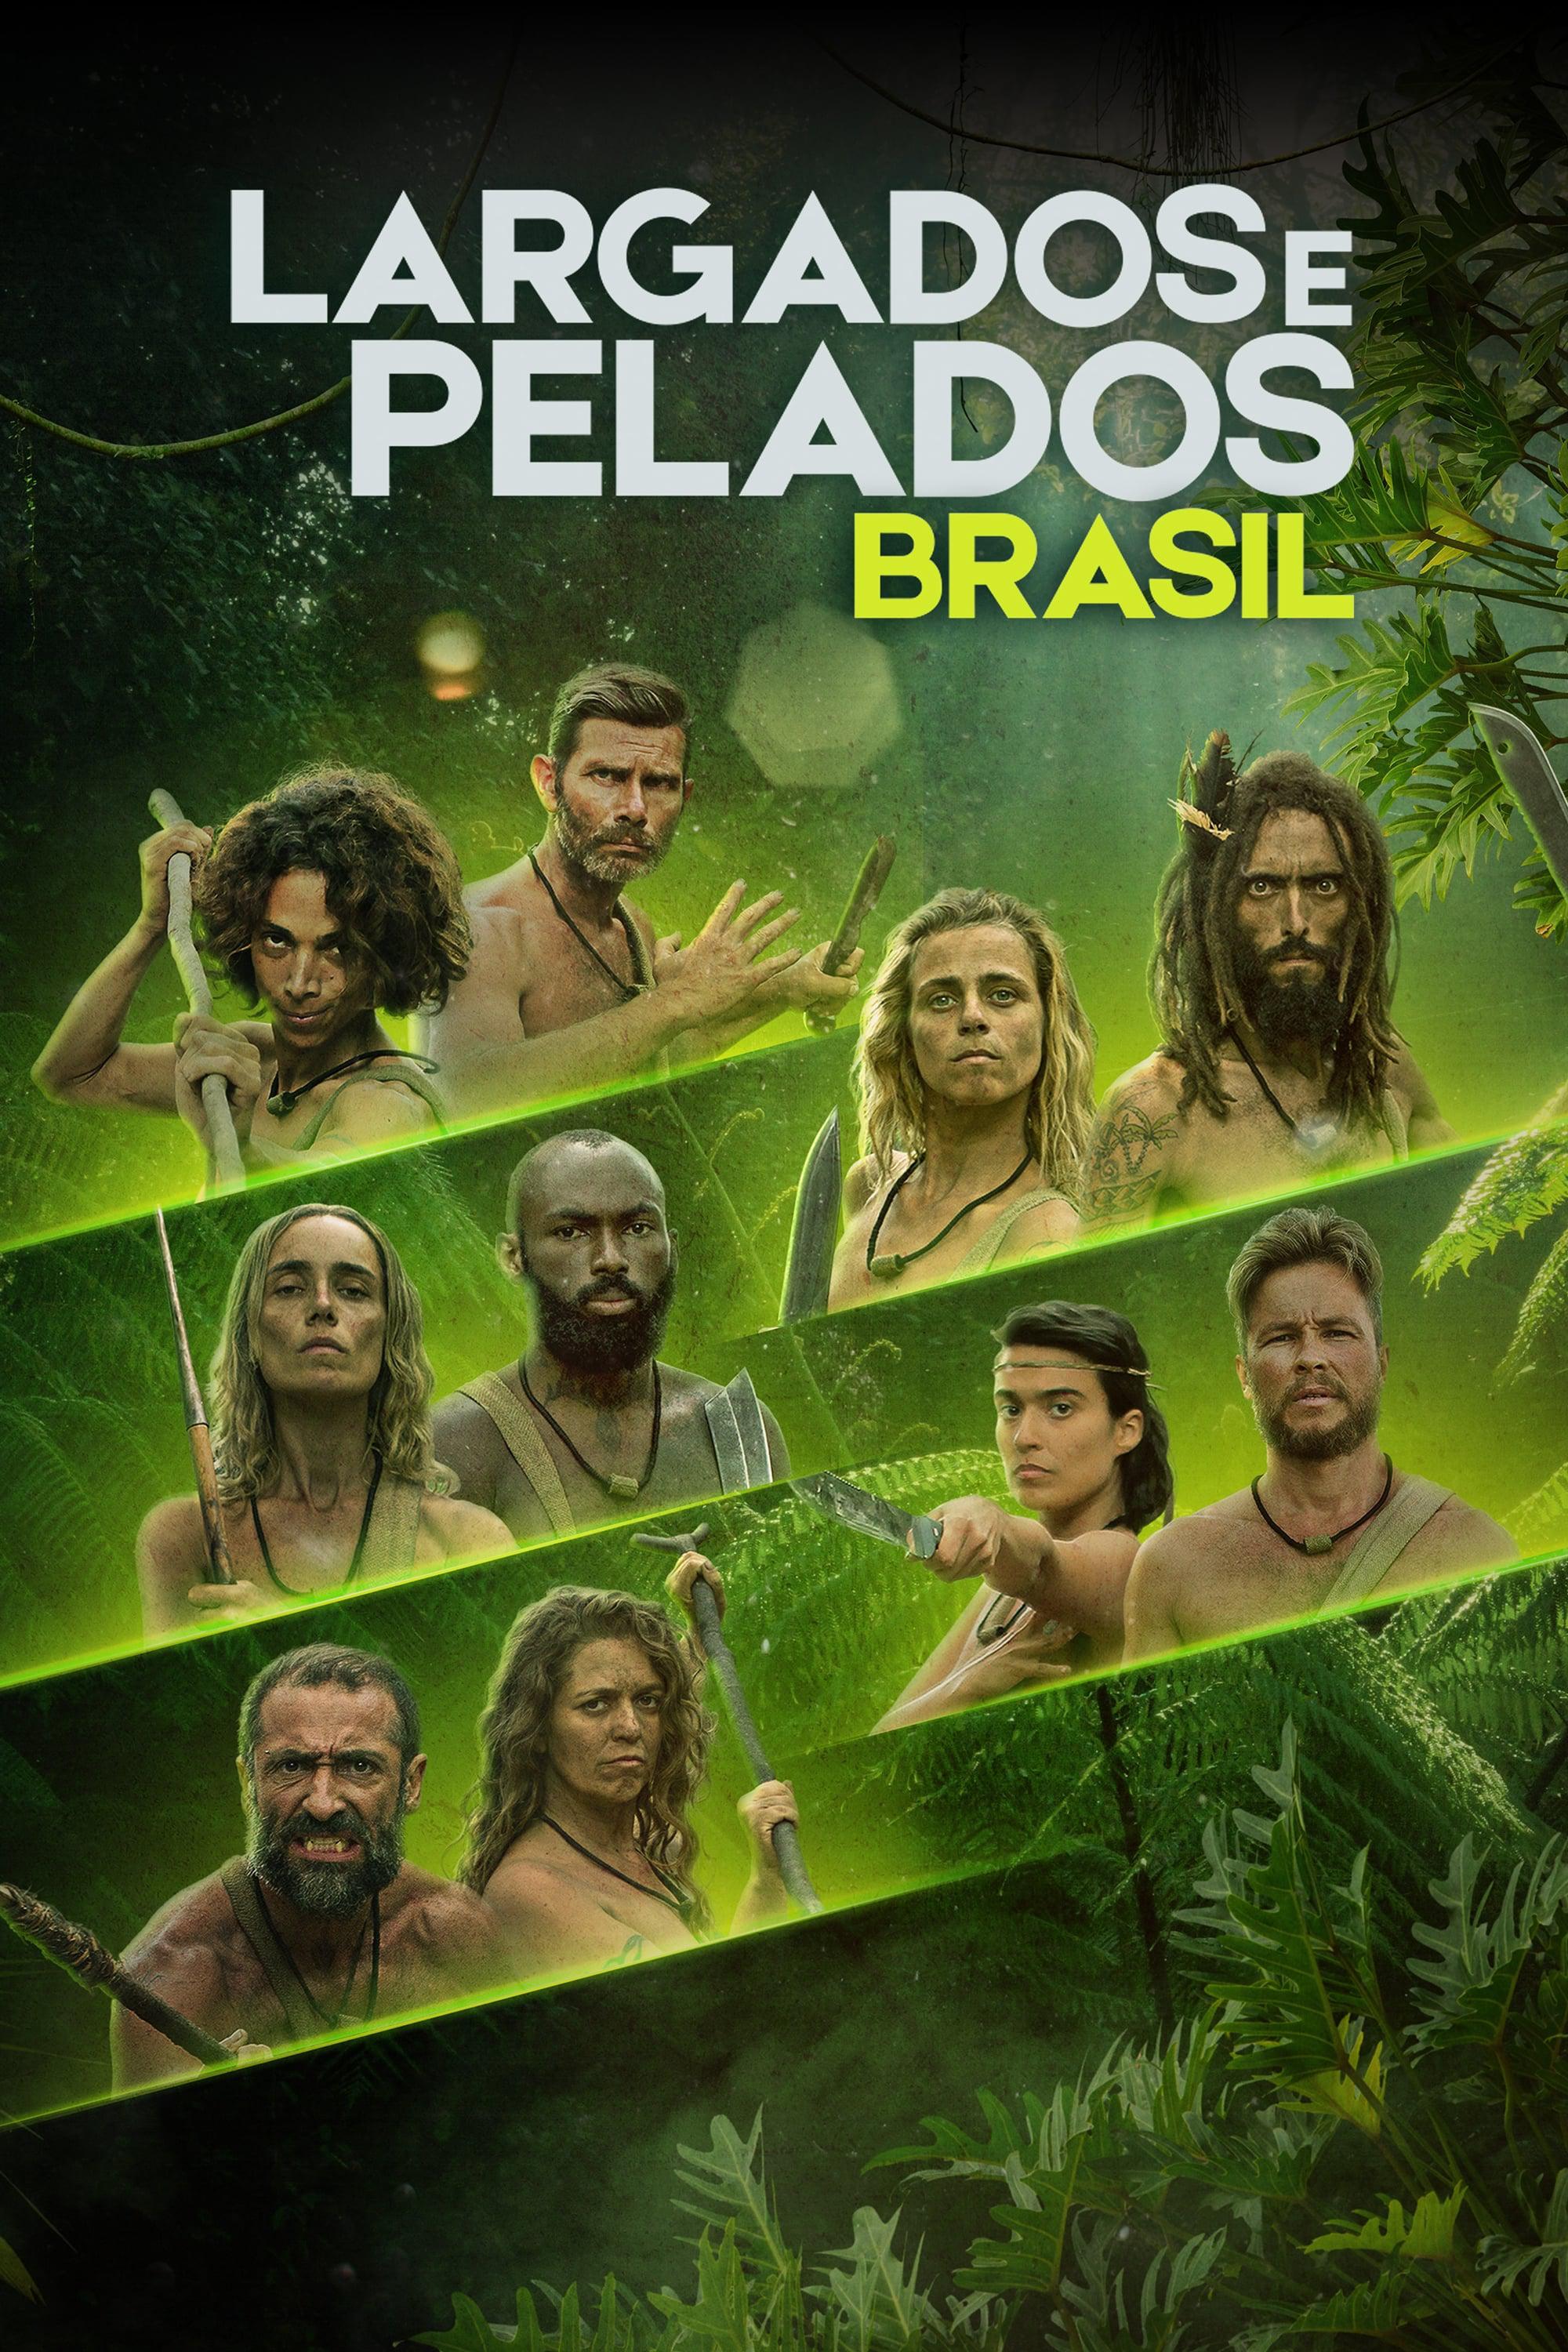 TV ratings for Naked And Afraid Brazil (Largados E Pelados Brasil) in Russia. Discovery+ TV series